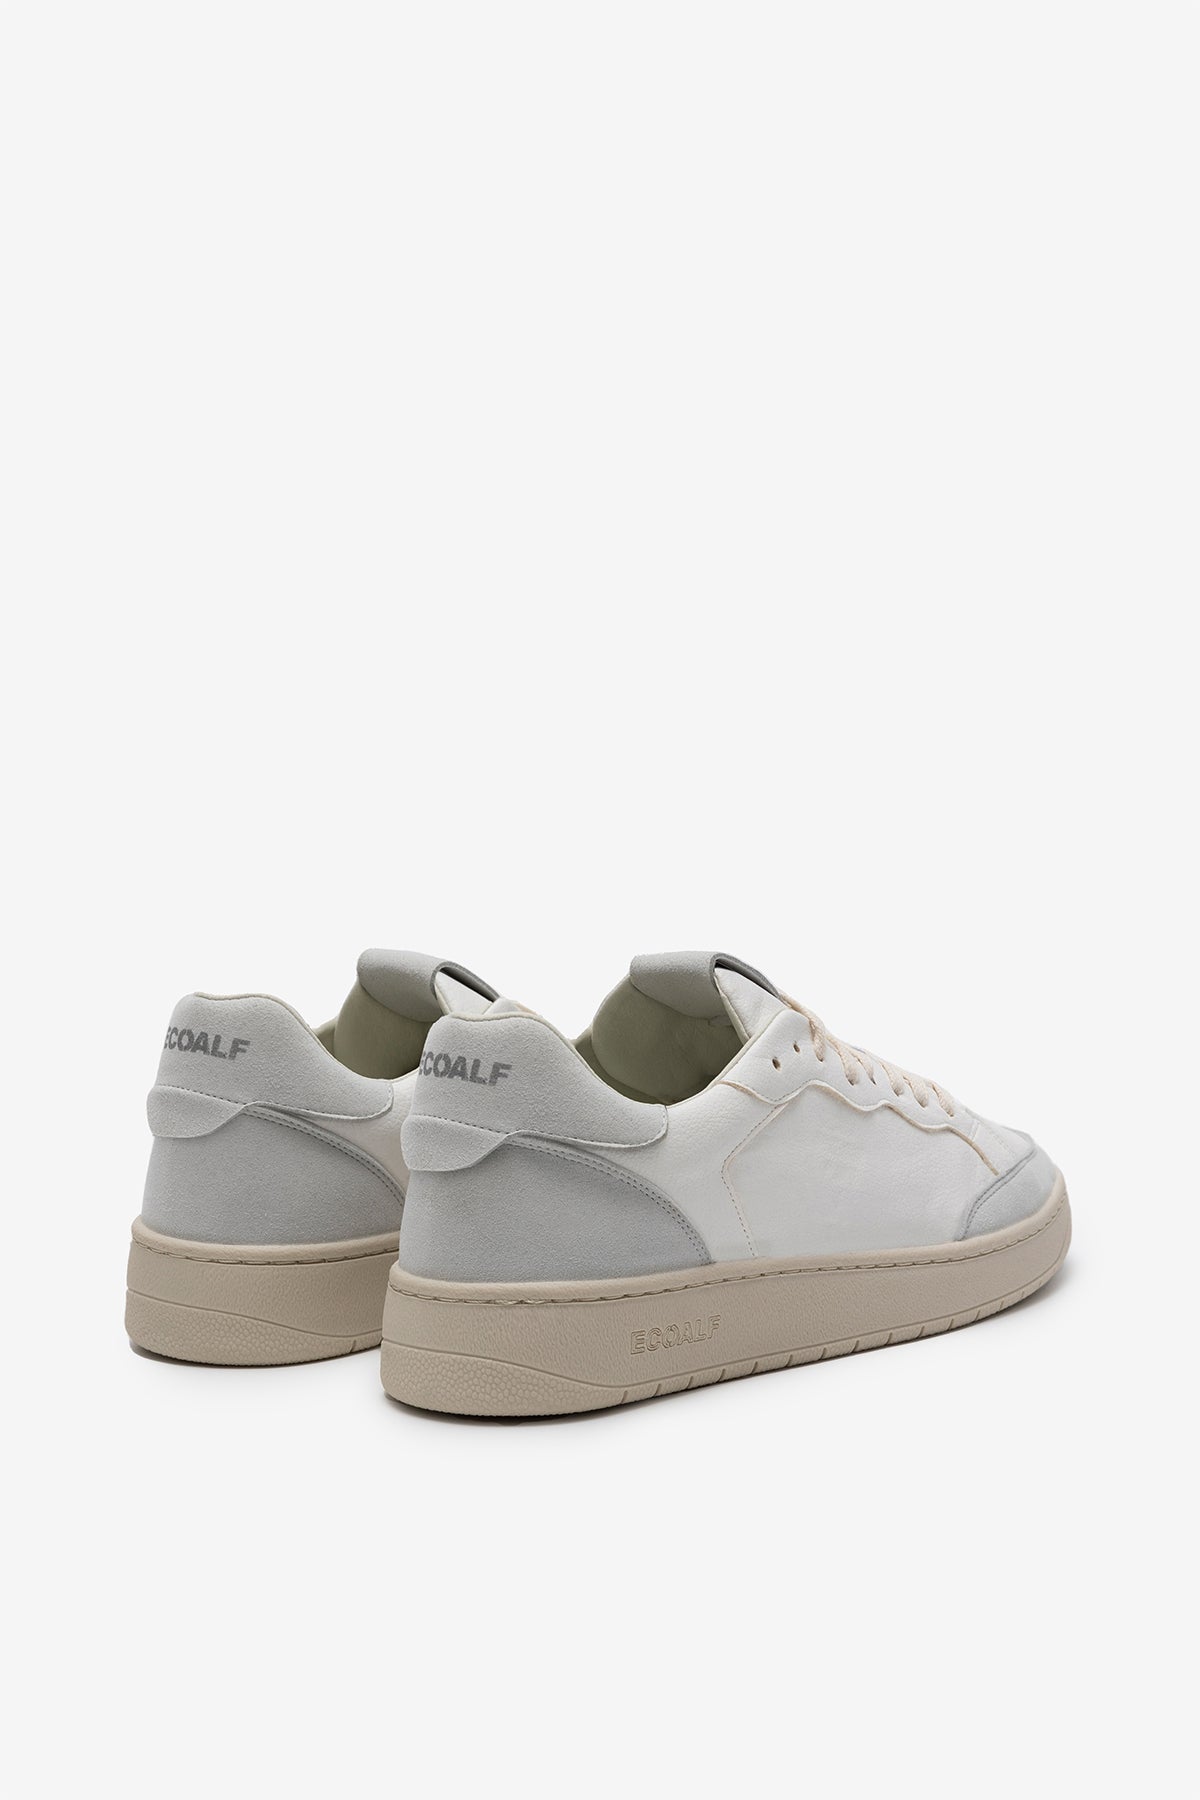 WHITE ARAL TRAINERS 